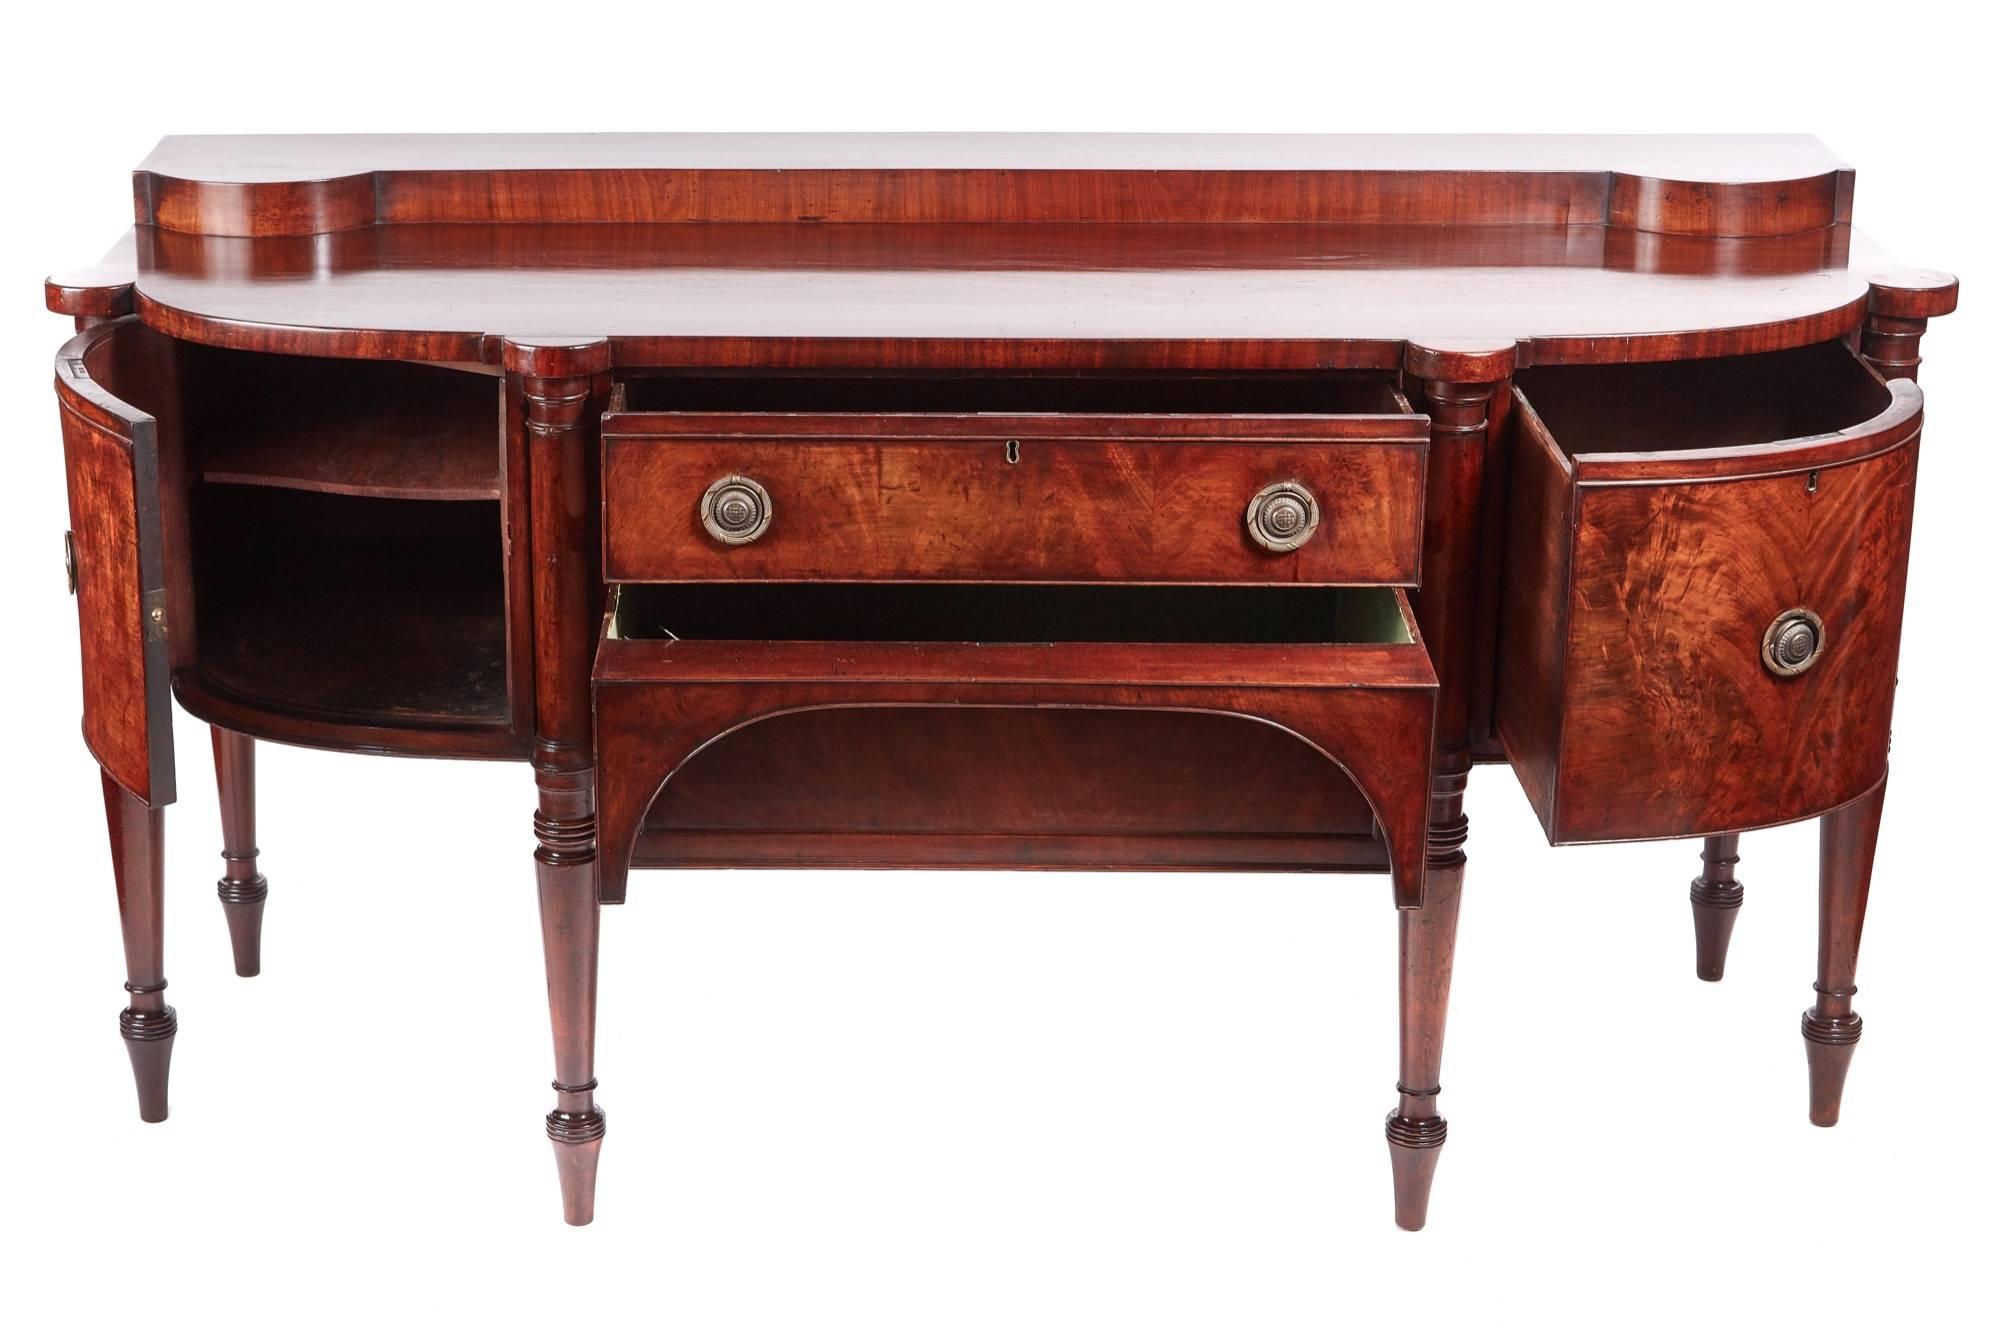 Quality George III antique mahogany sideboard, having a low shaped gallery with a fantastic mahogany top, two long cutlery drawers to the front flanked either side by a single wine drawer and a cupboard door all with original brass handles, standing